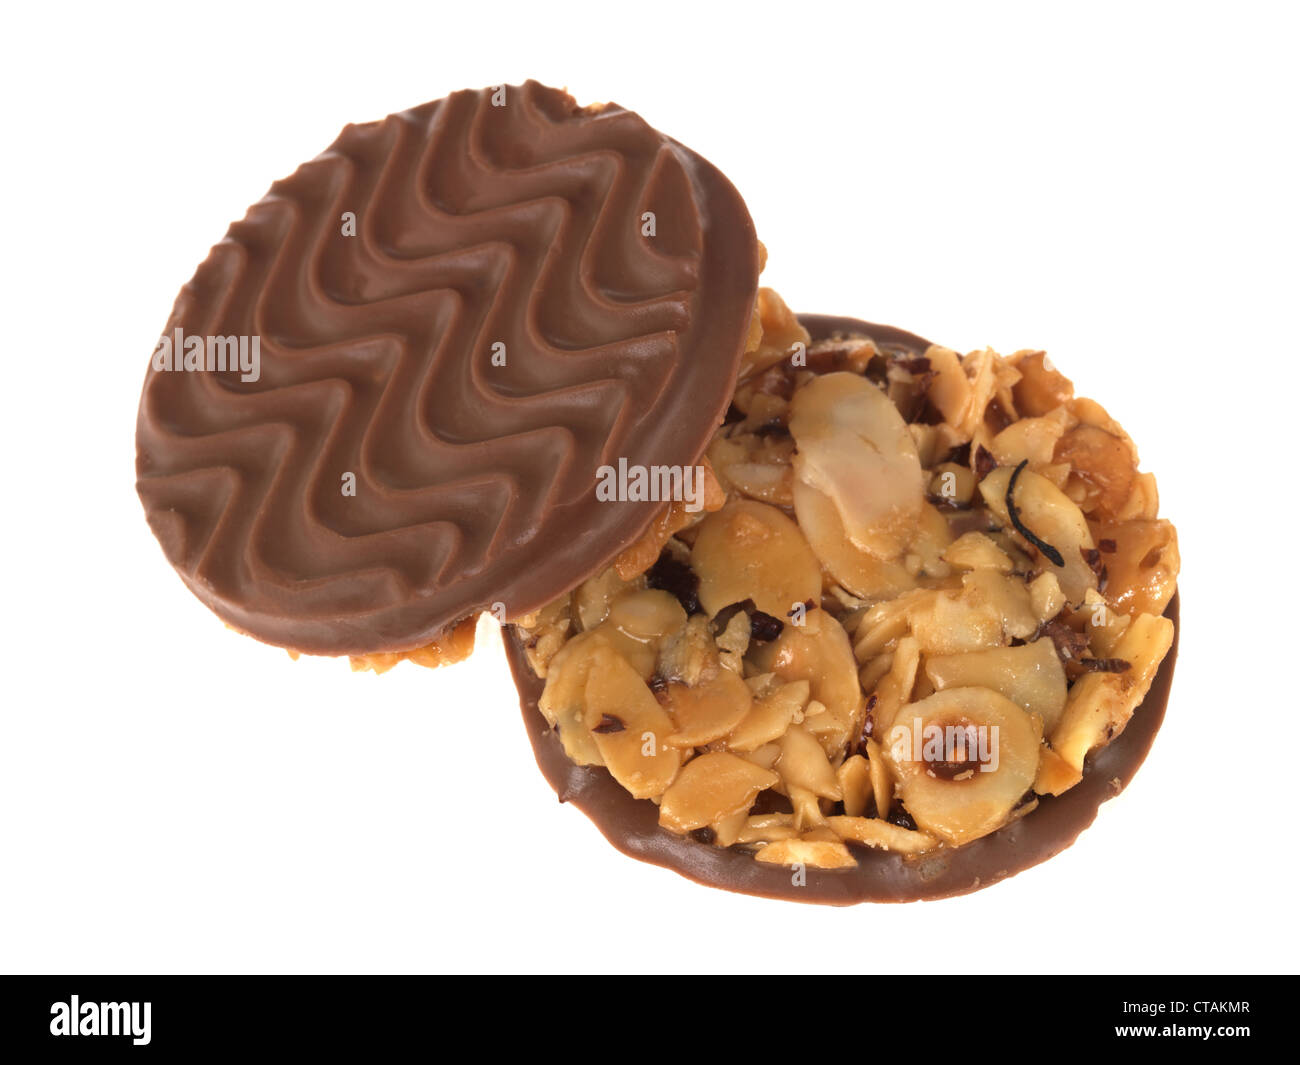 Tasty Luxury Christmas Milk Chocolate Florentines Biscuit Snacks, Isolated Against A White Background, With A Clipping Path And No People Stock Photo